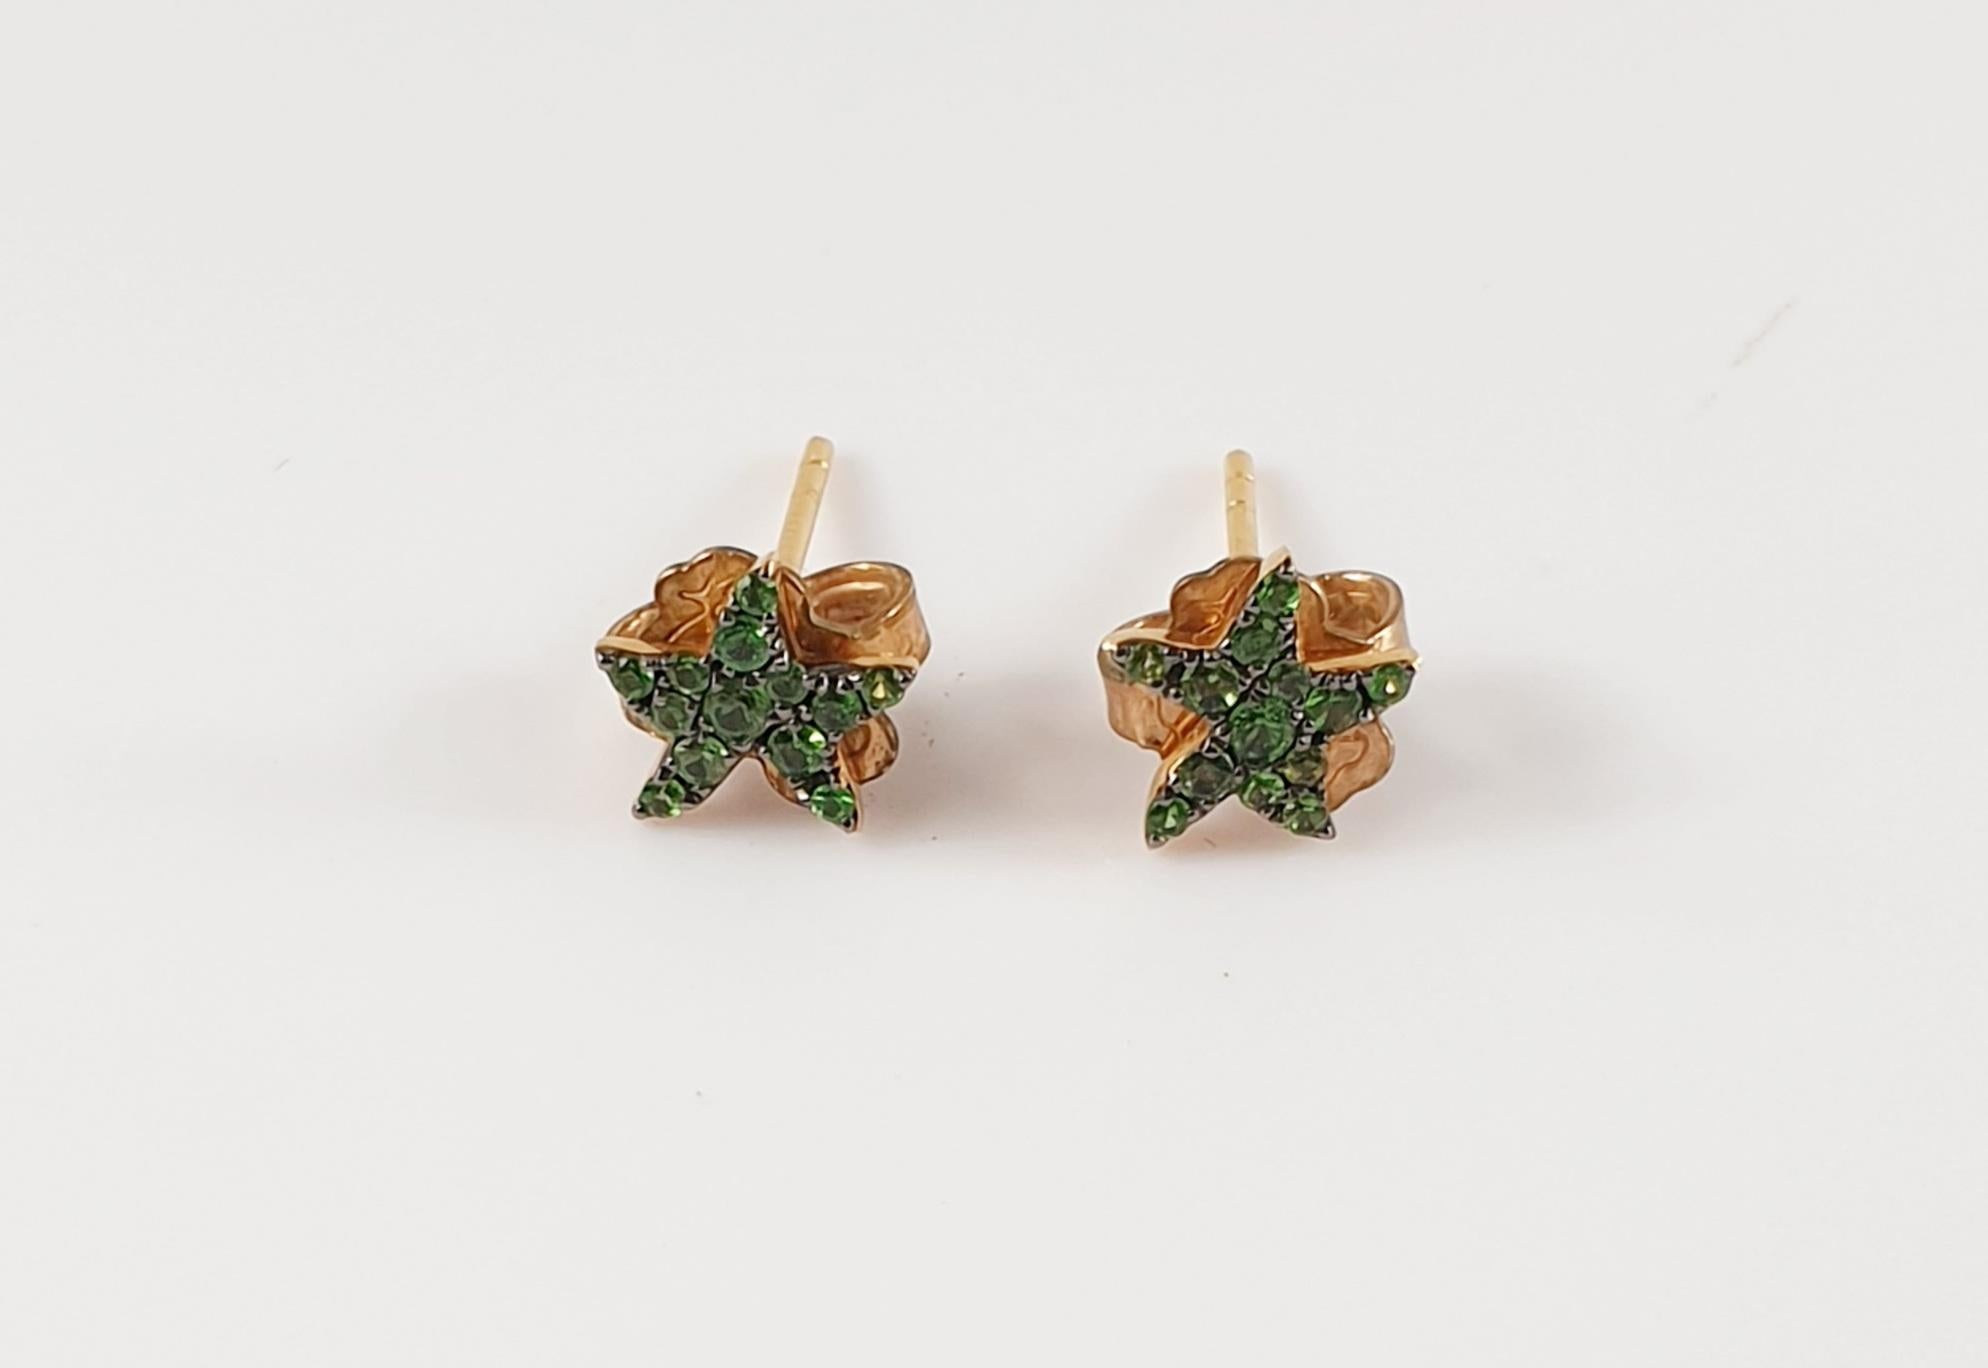 Starfish stud earring in 9 kt rose gold with tsavorites (0.18 ct)
Rest of boutique stock

READY TO SHIP
*Shipment of this piece is not affected by COVID-19. Orders welcome!*

It was 1994 when Pomellato set out to expand its precious world by